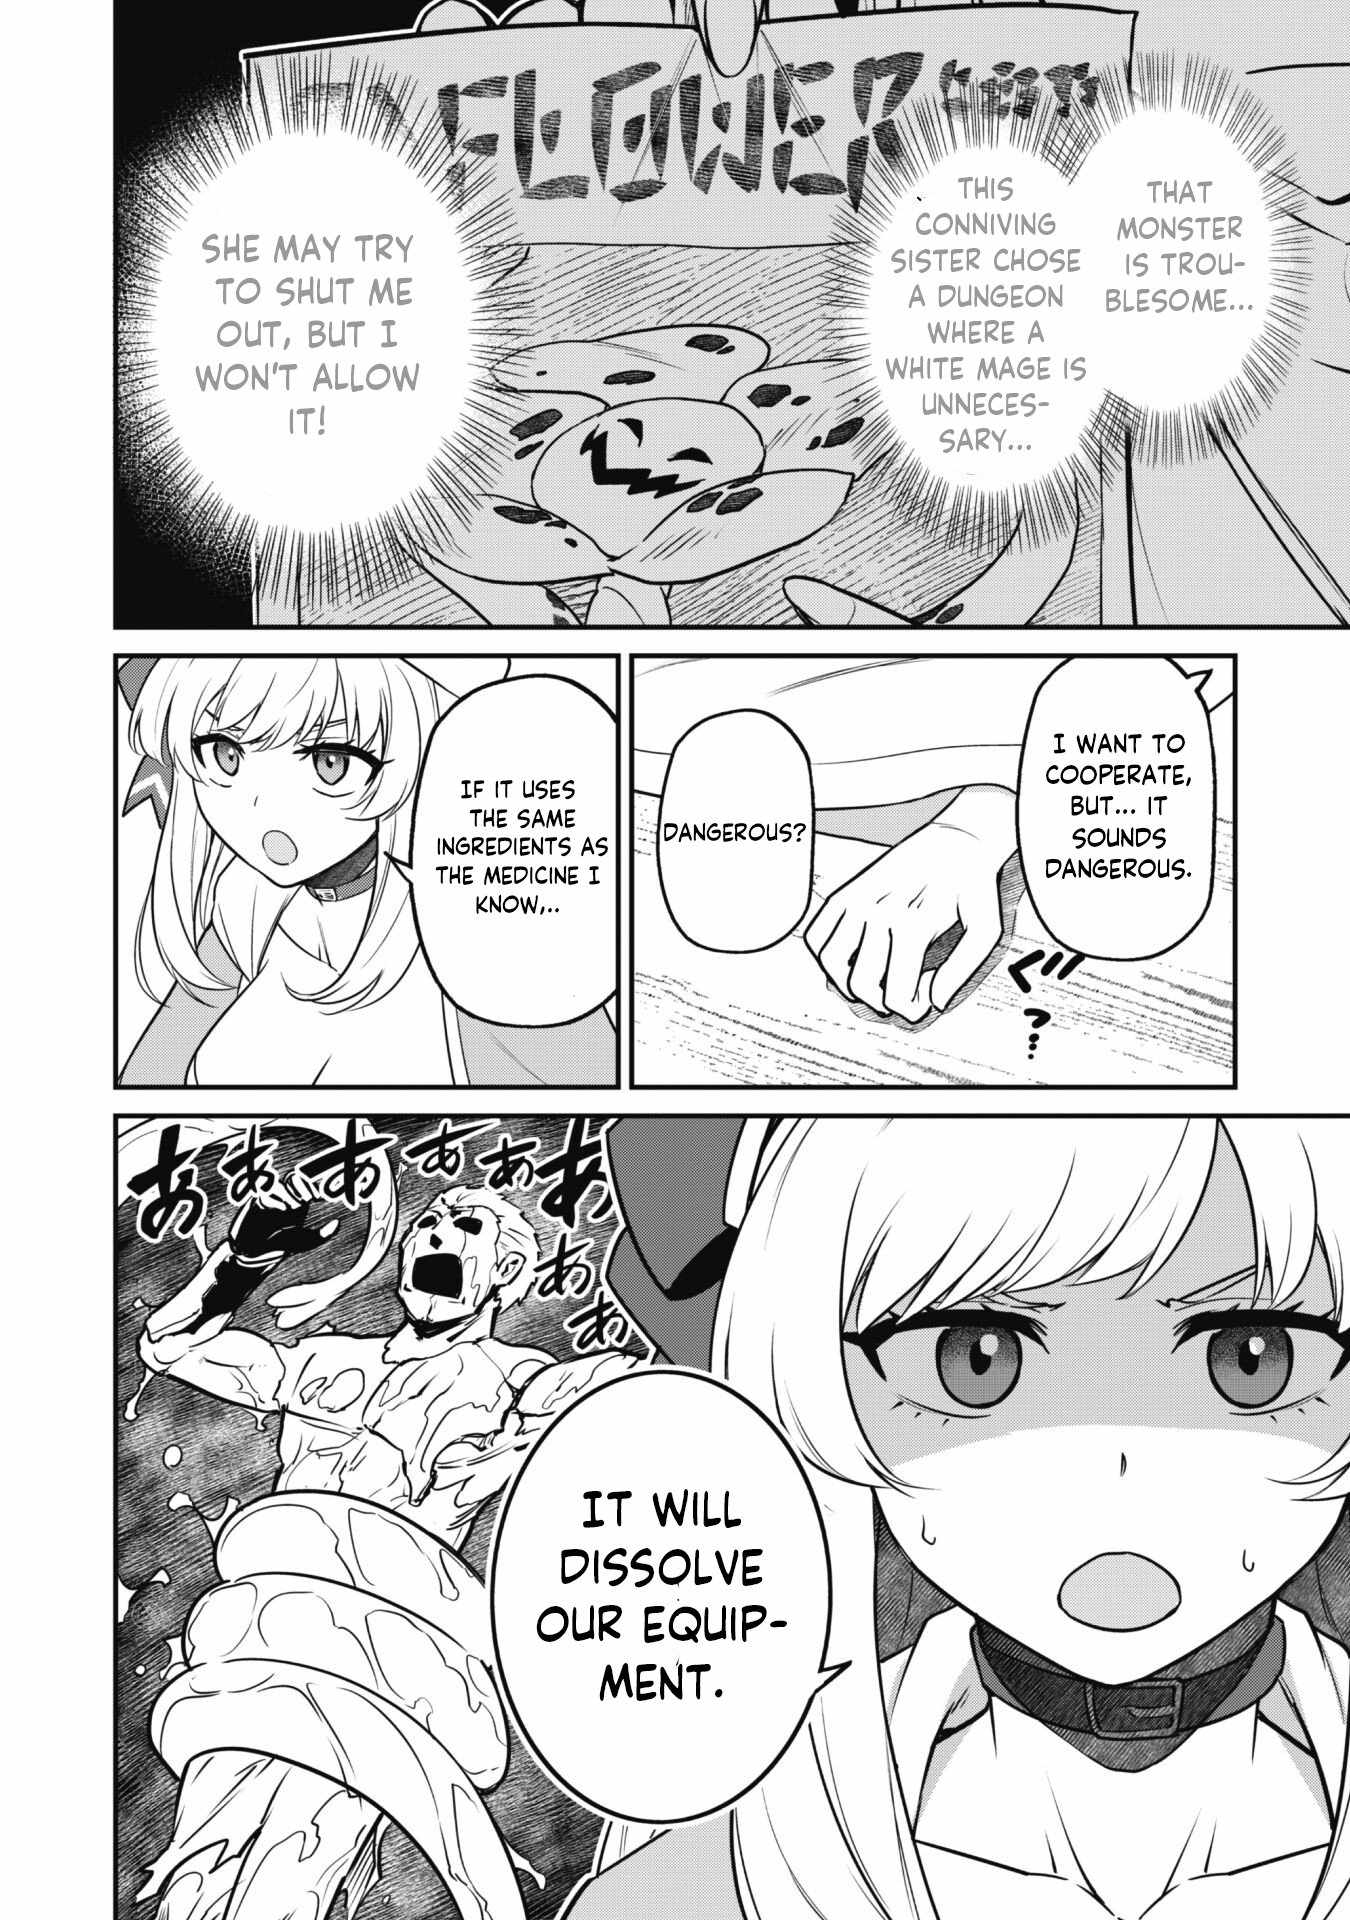 The White Mage Who Joined My Party Is a Circle Crusher, So My Isekai Life Is at Risk of Collapsing Once Again Chapter 6-1-eng-li - Page 5